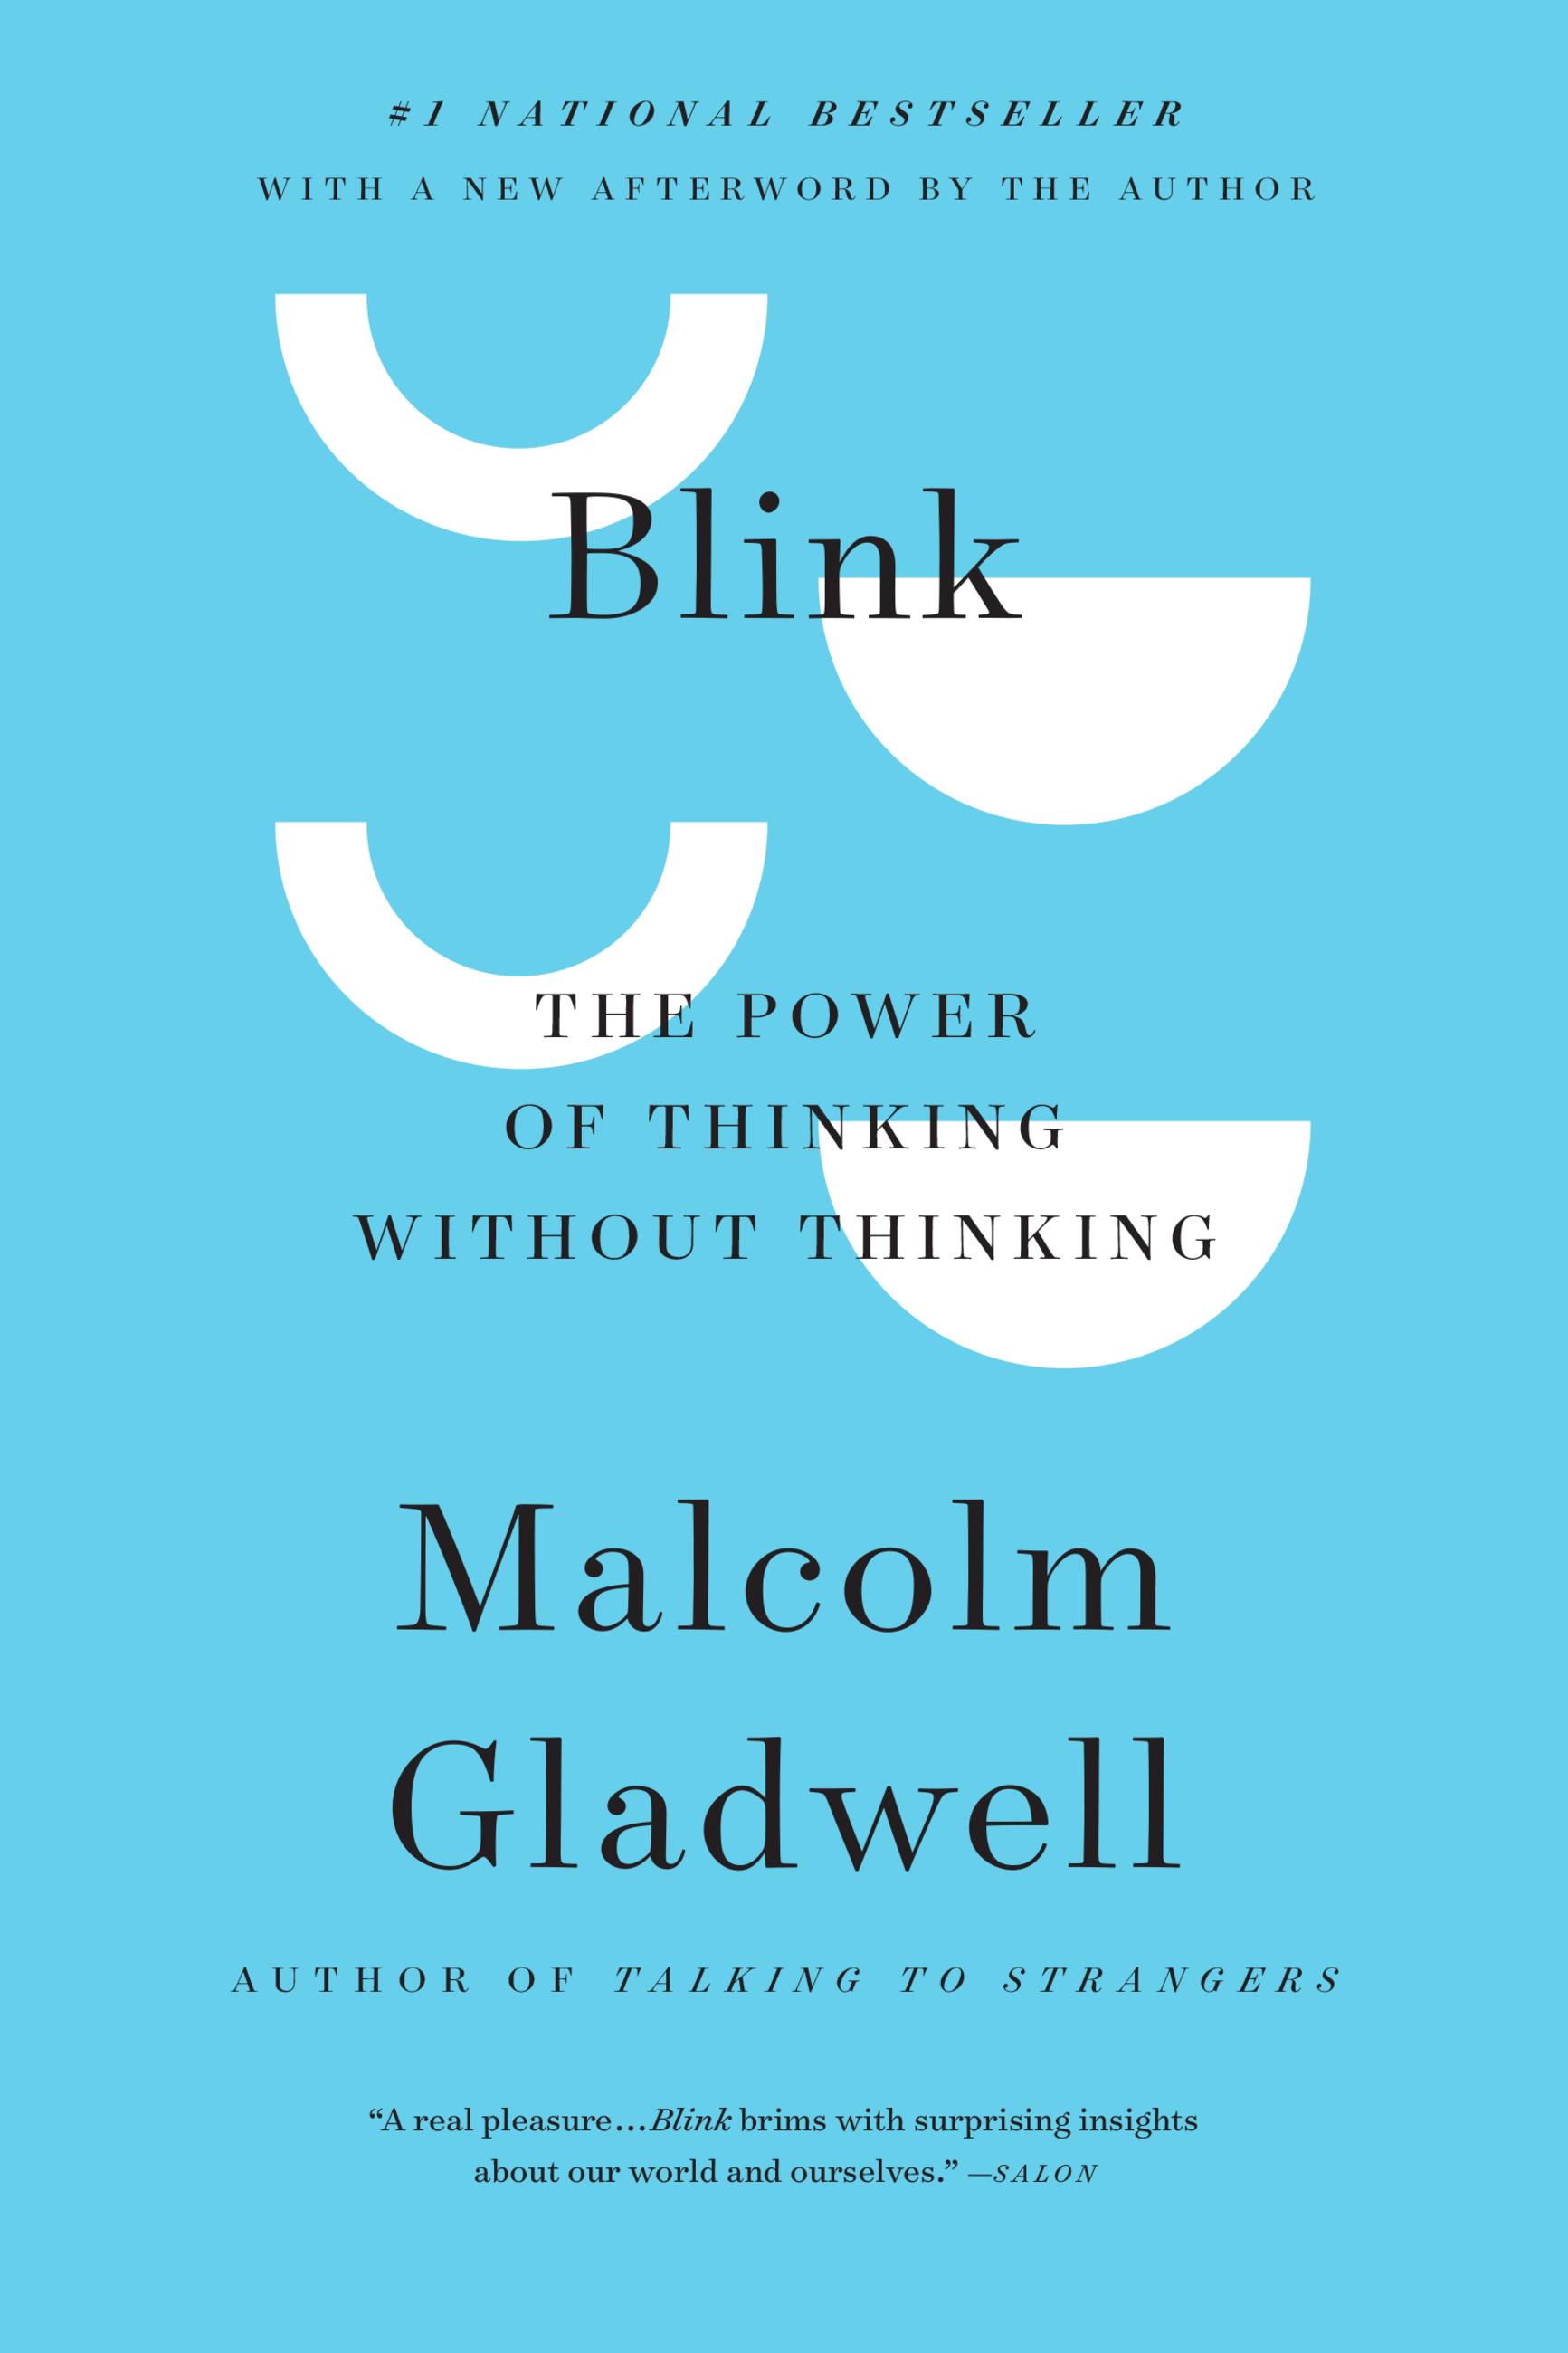 Blink by malcolm gladwell pdf download project zomboid failed to download map from the server